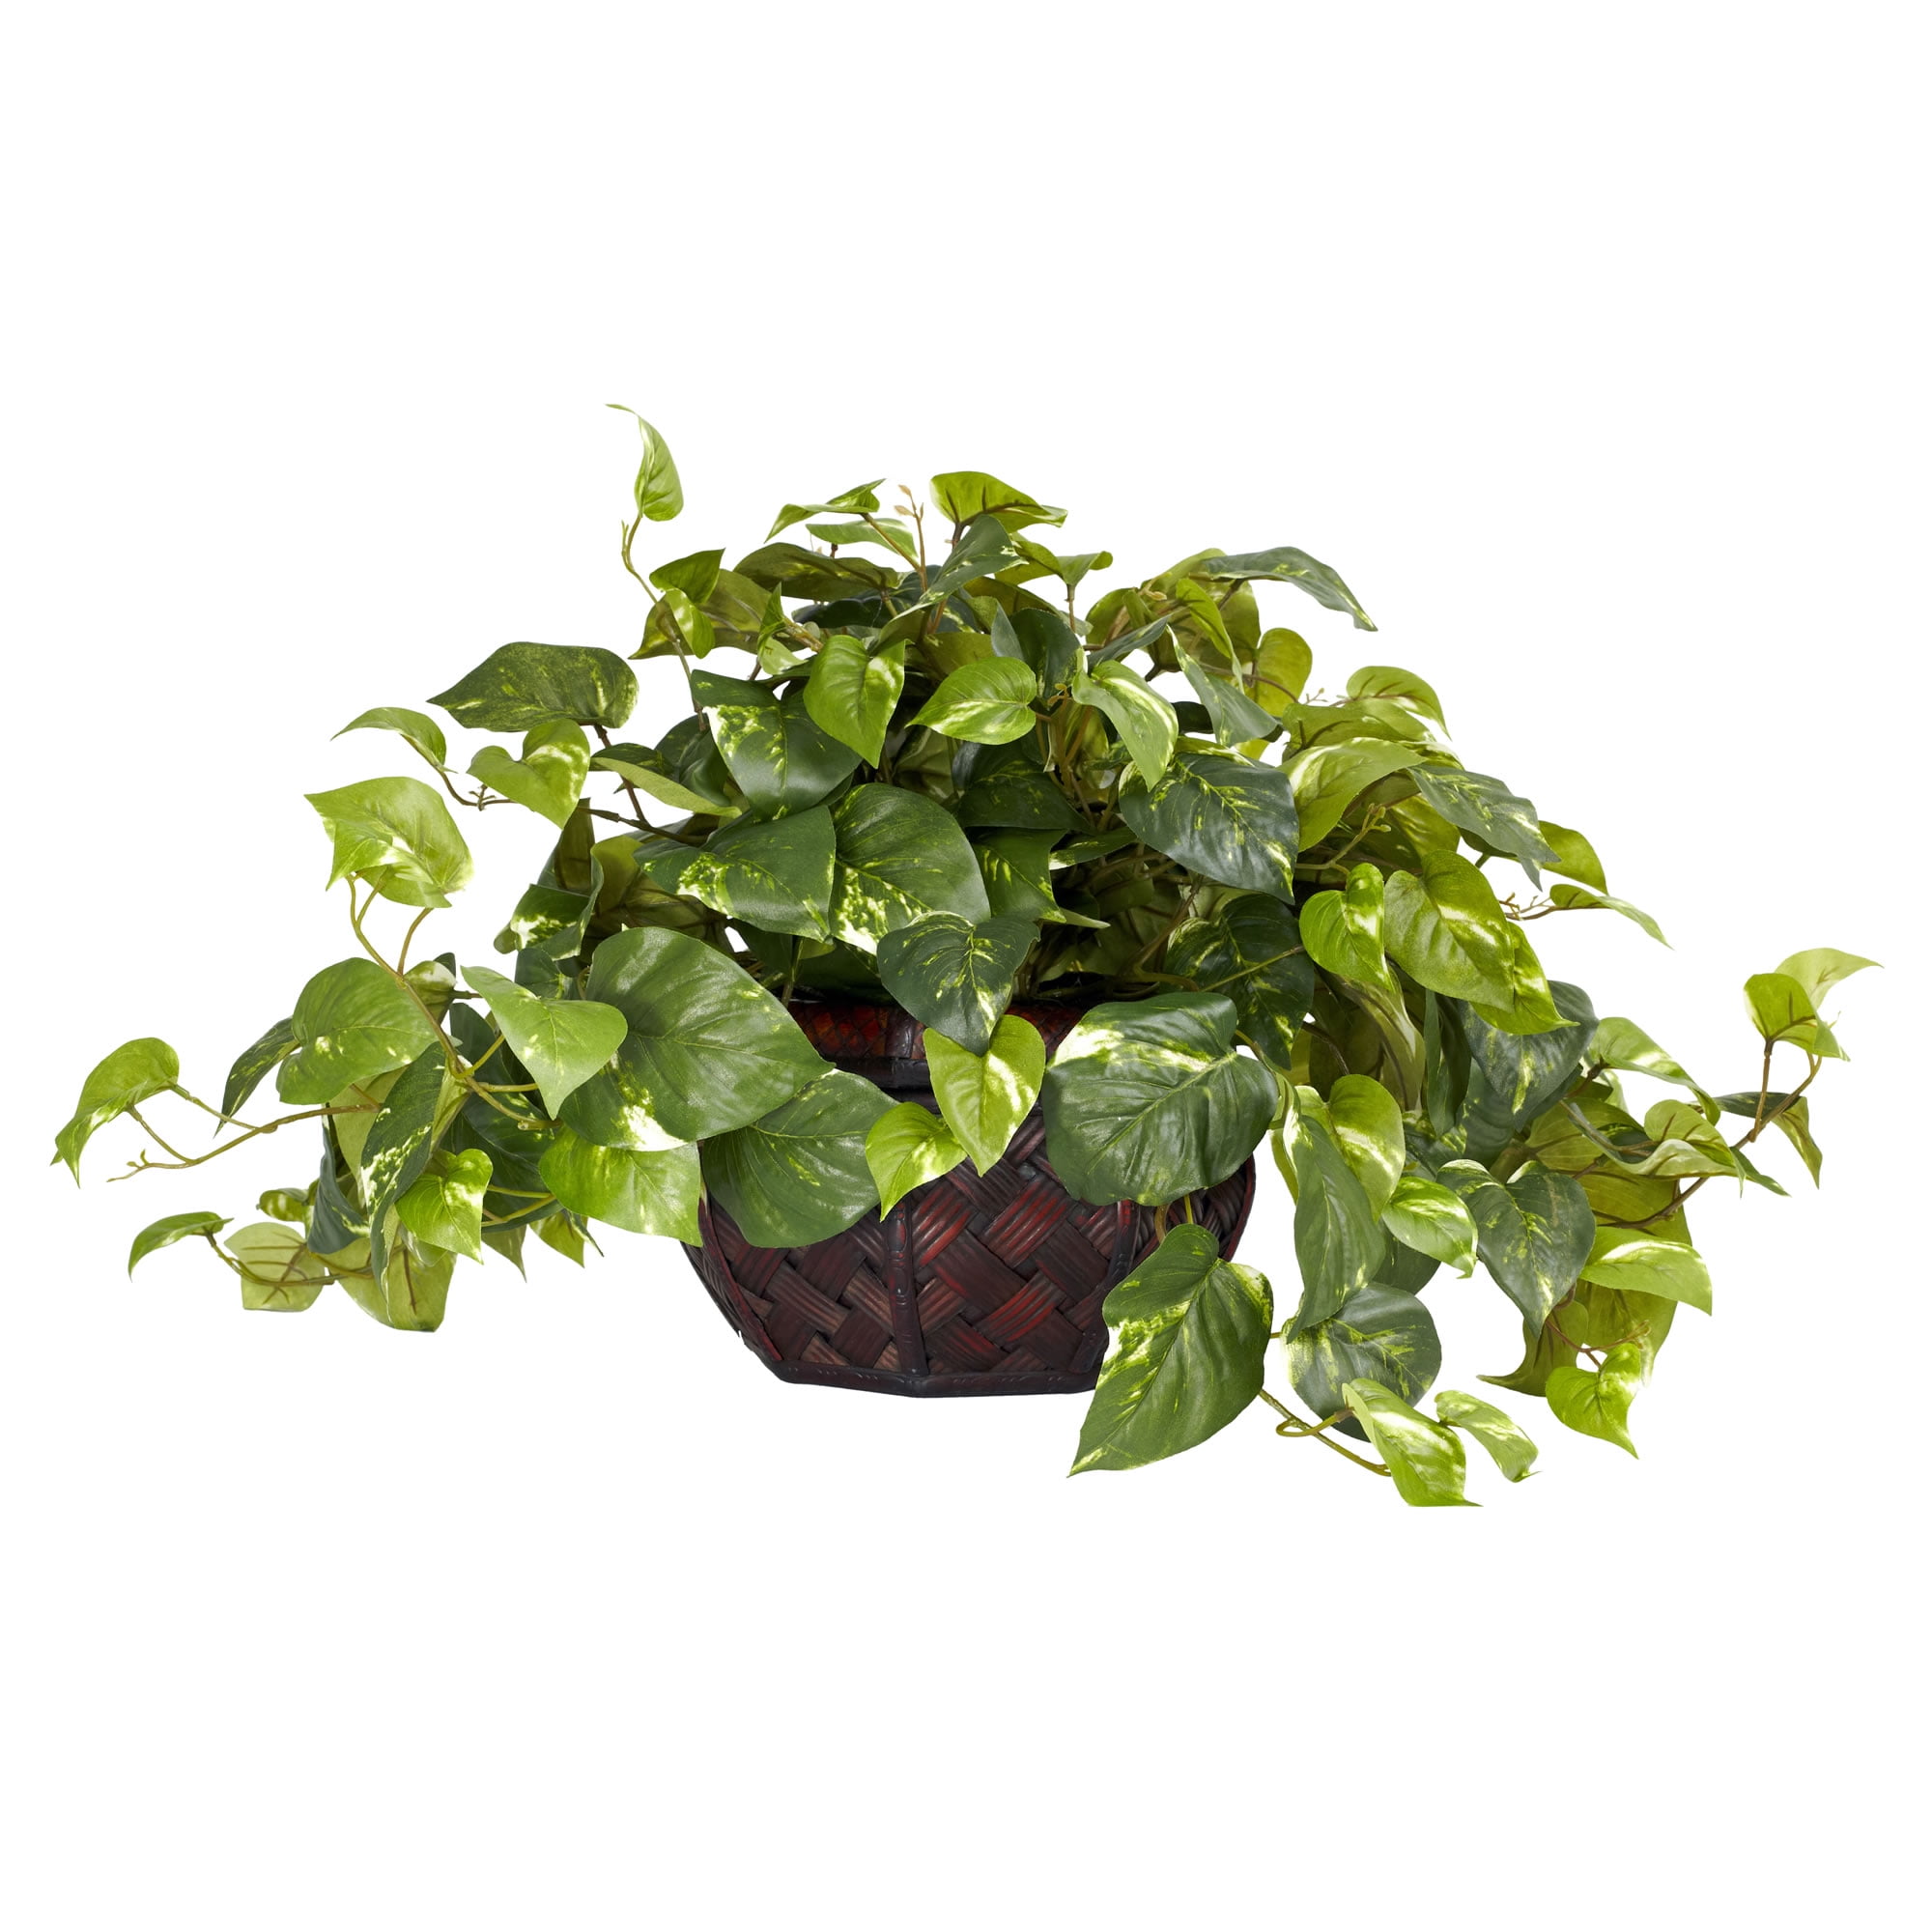 Details about   17in Pothos Hanging Plant Bush Variegated Leaf Artificial Greenery Fake Silk Ivy 